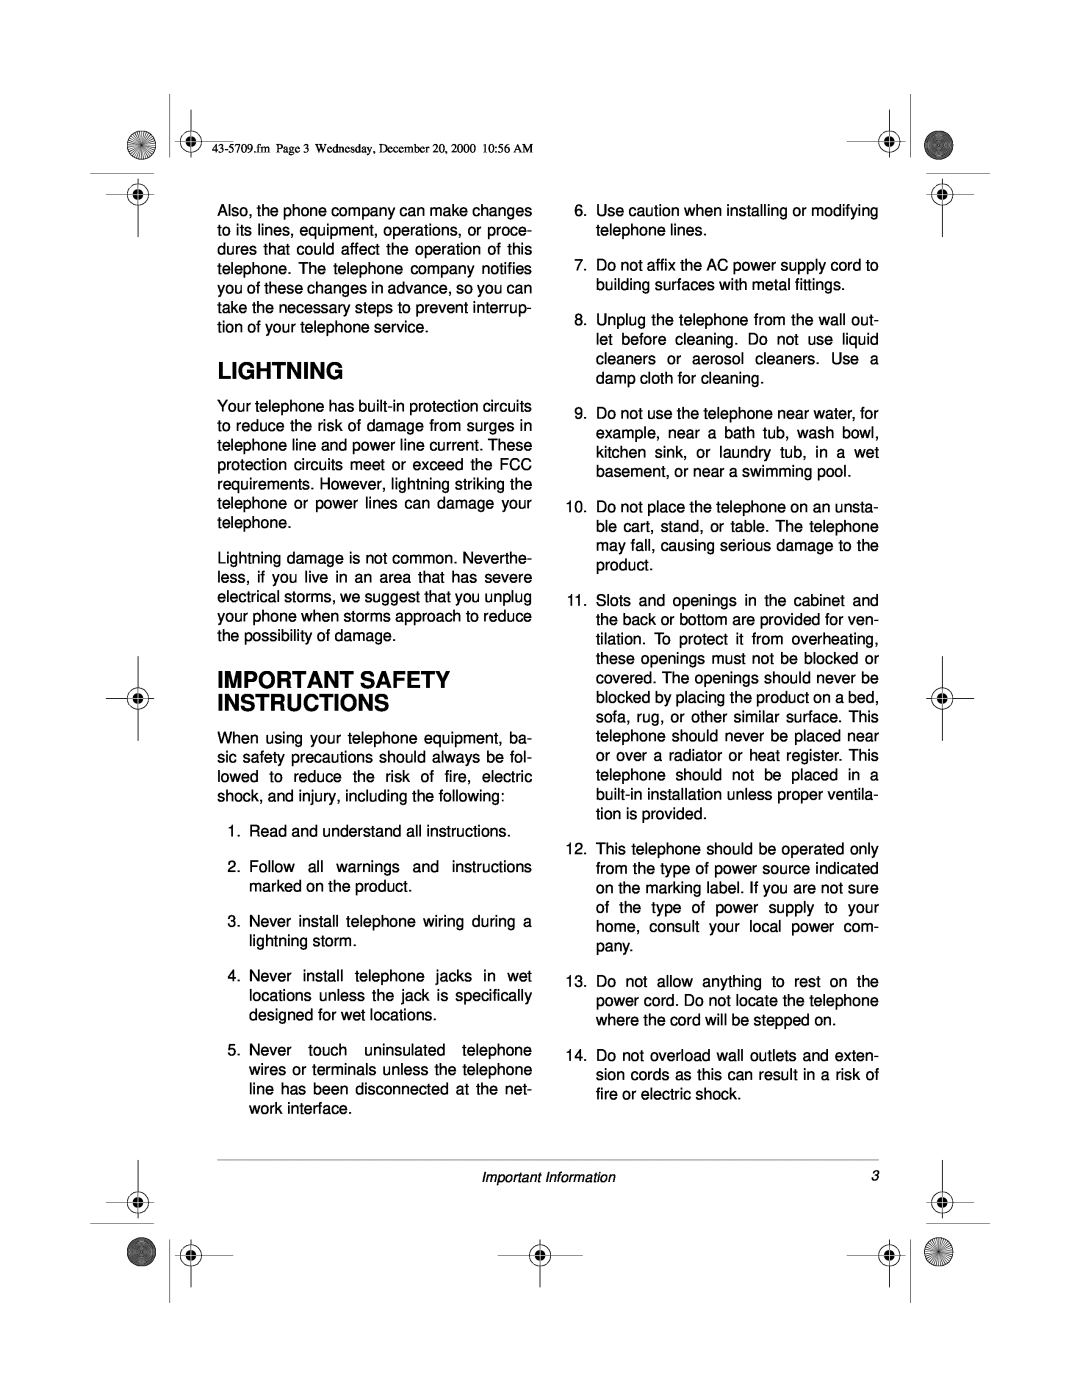 Radio Shack 4-Line Telephone System with Speakerphone and Caller ID owner manual Lightning, Important Safety Instructions 